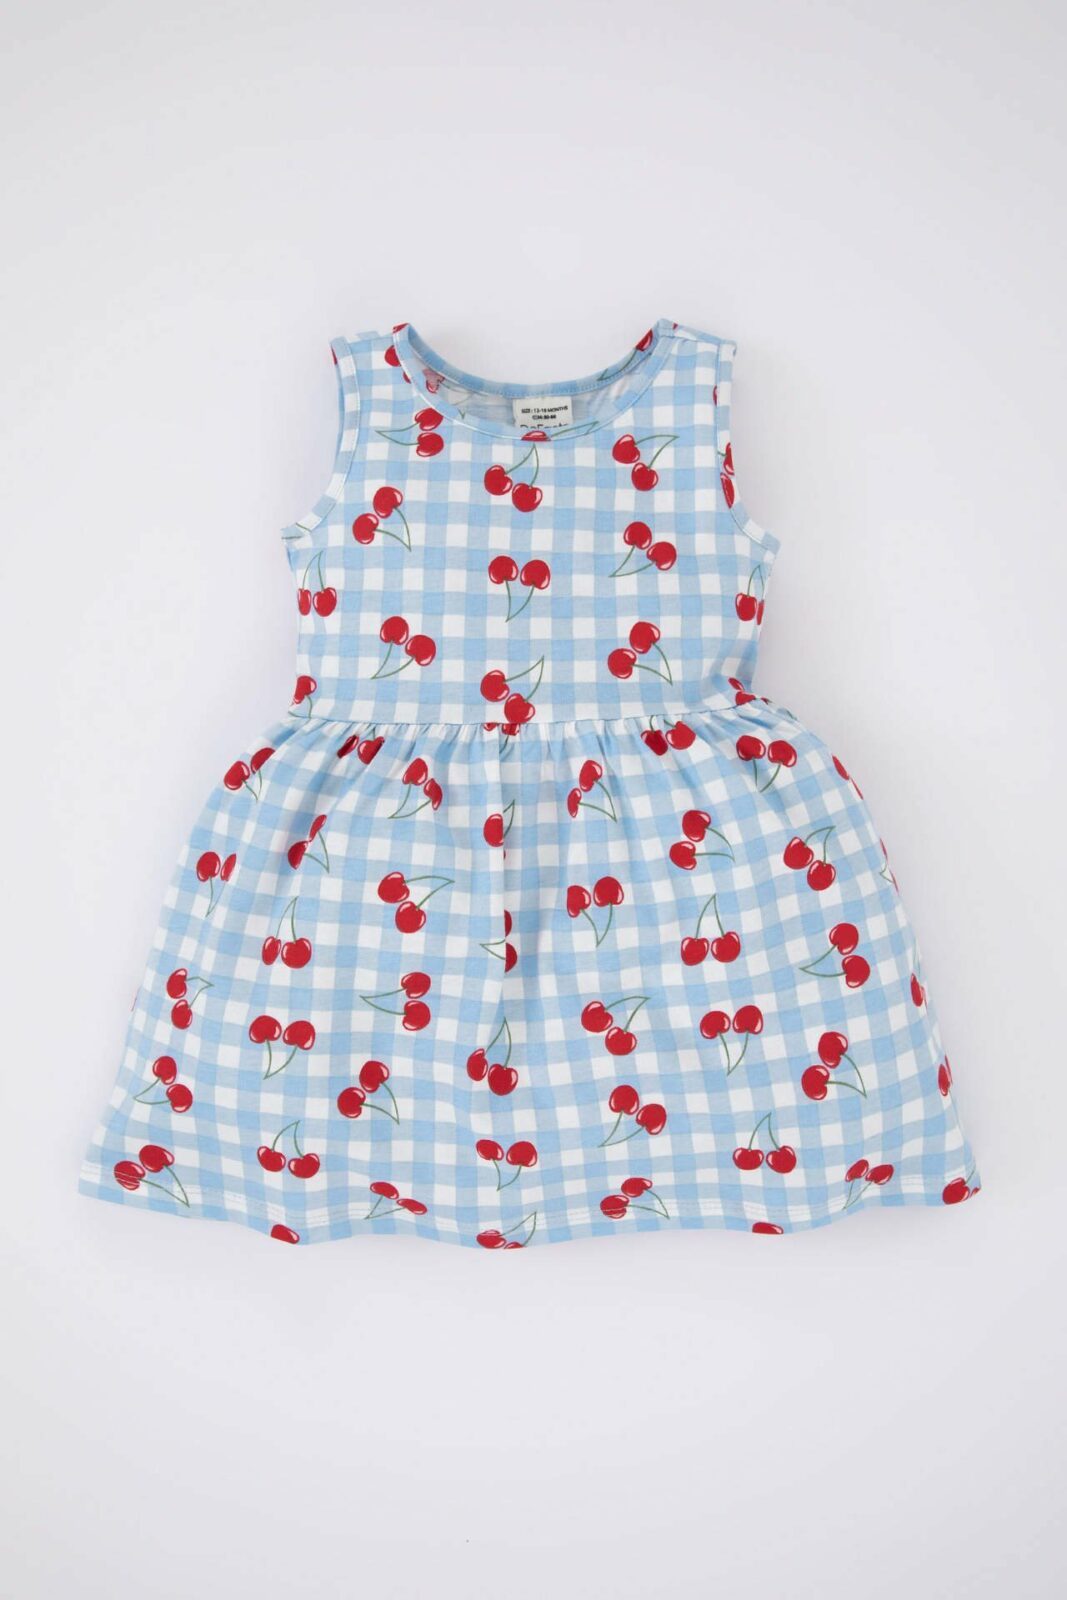 DEFACTO Baby Girl Patterned